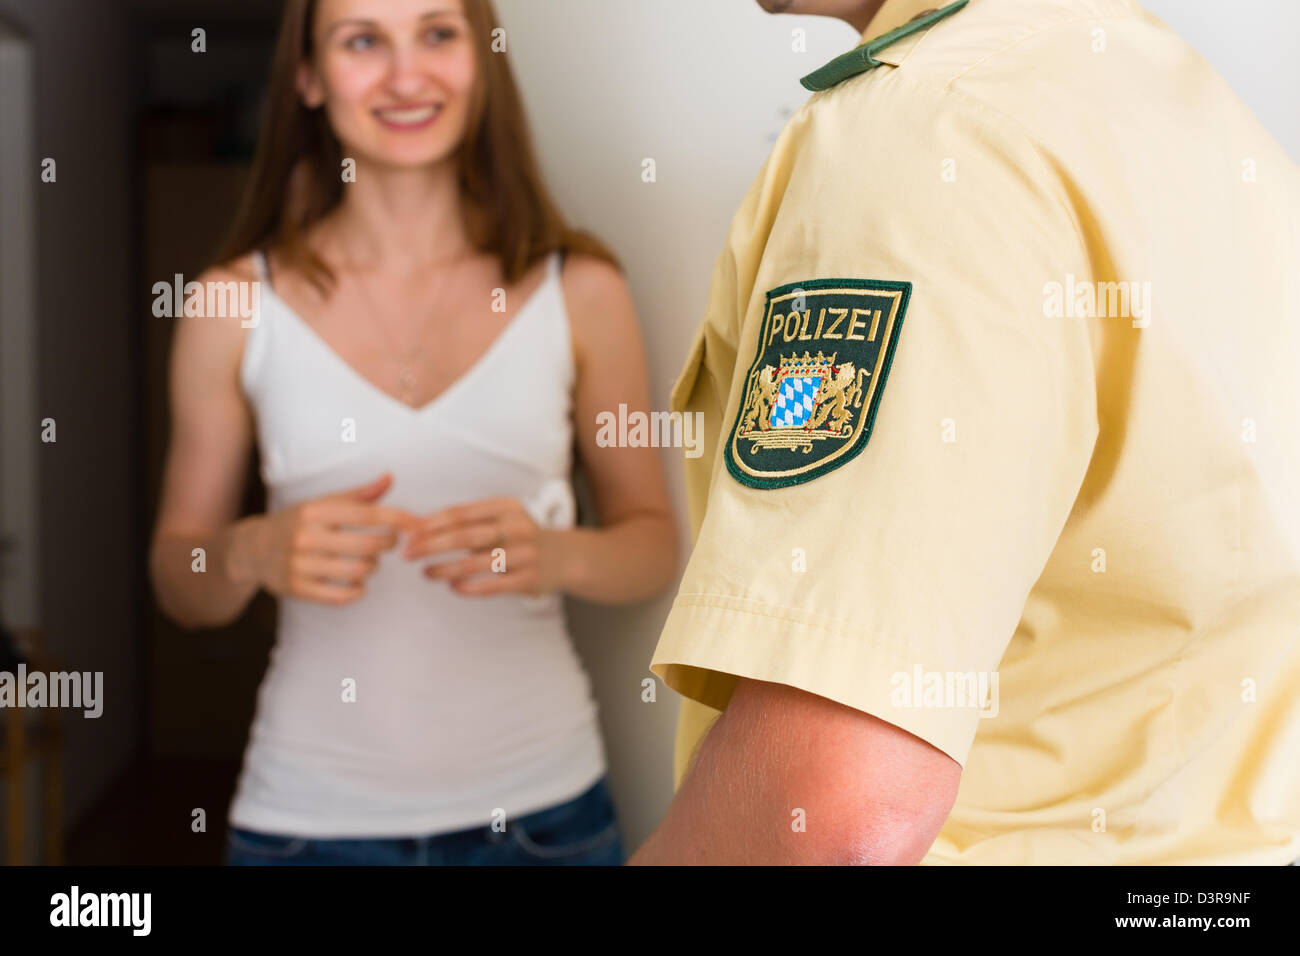 Police officer at front door of home interrogating a woman or witness regarding a police investigation Stock Photo